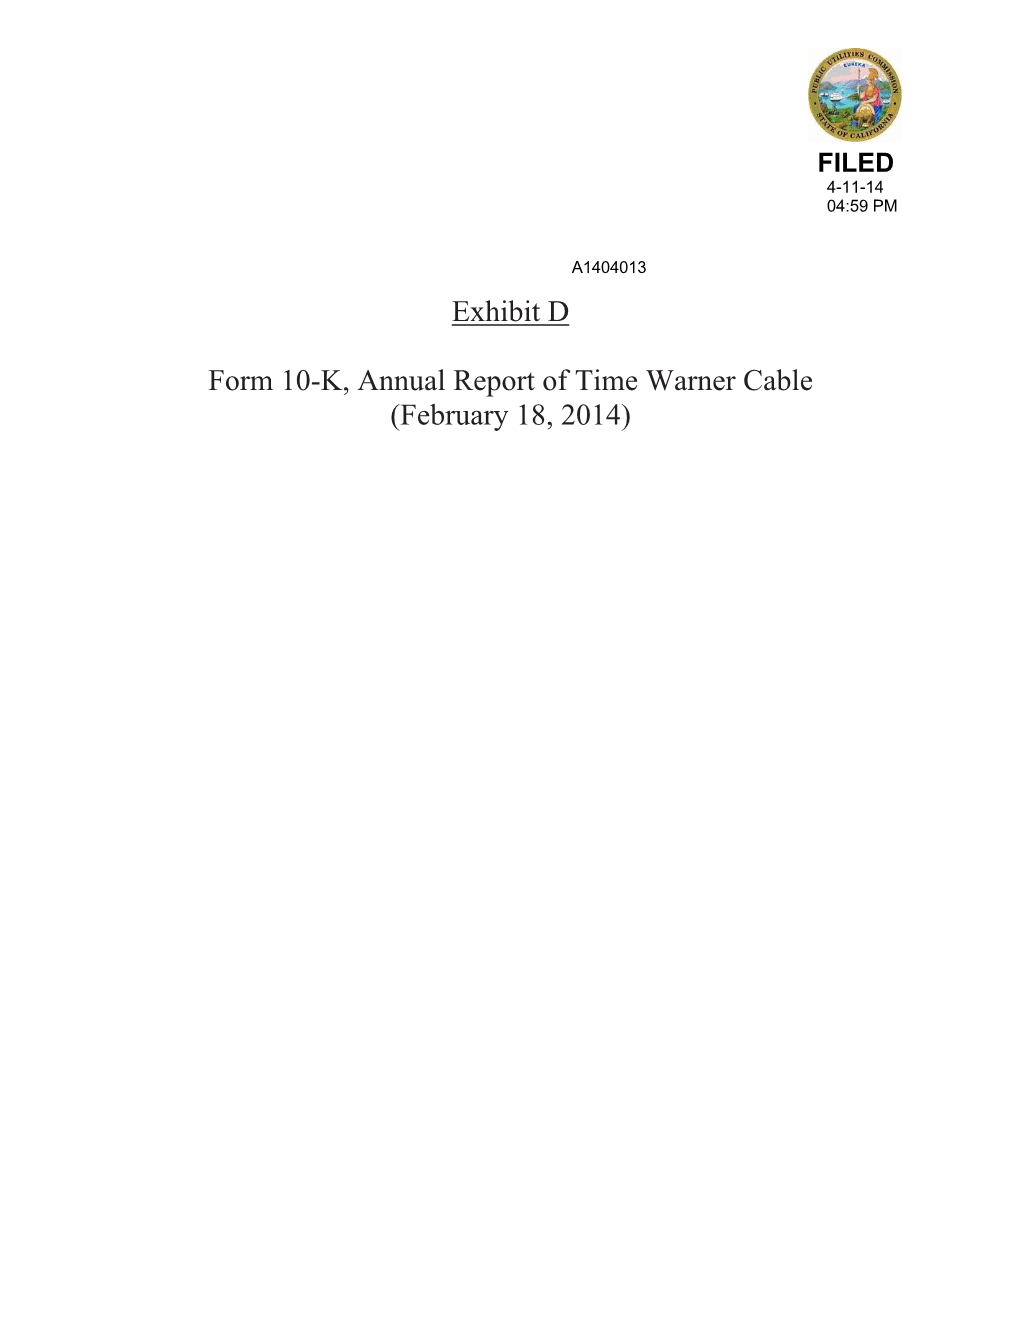 Exhibit D Form 10-K, Annual Report of Time Warner